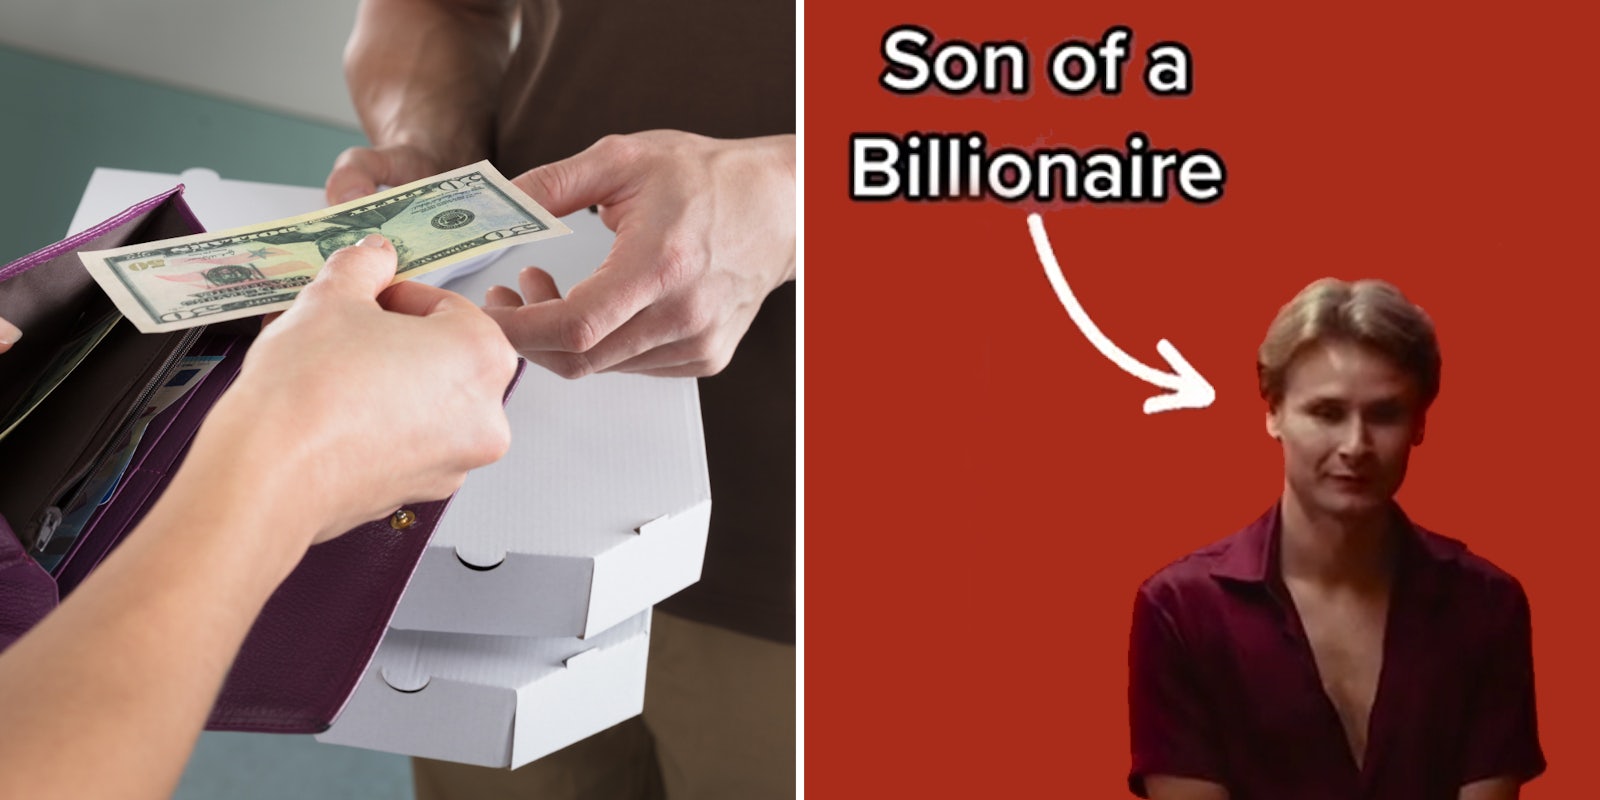 Hand giving tip to delivery person (l) The son of a billionaire with an arrow pointing to him caption 'the son of a billionaire' (r)